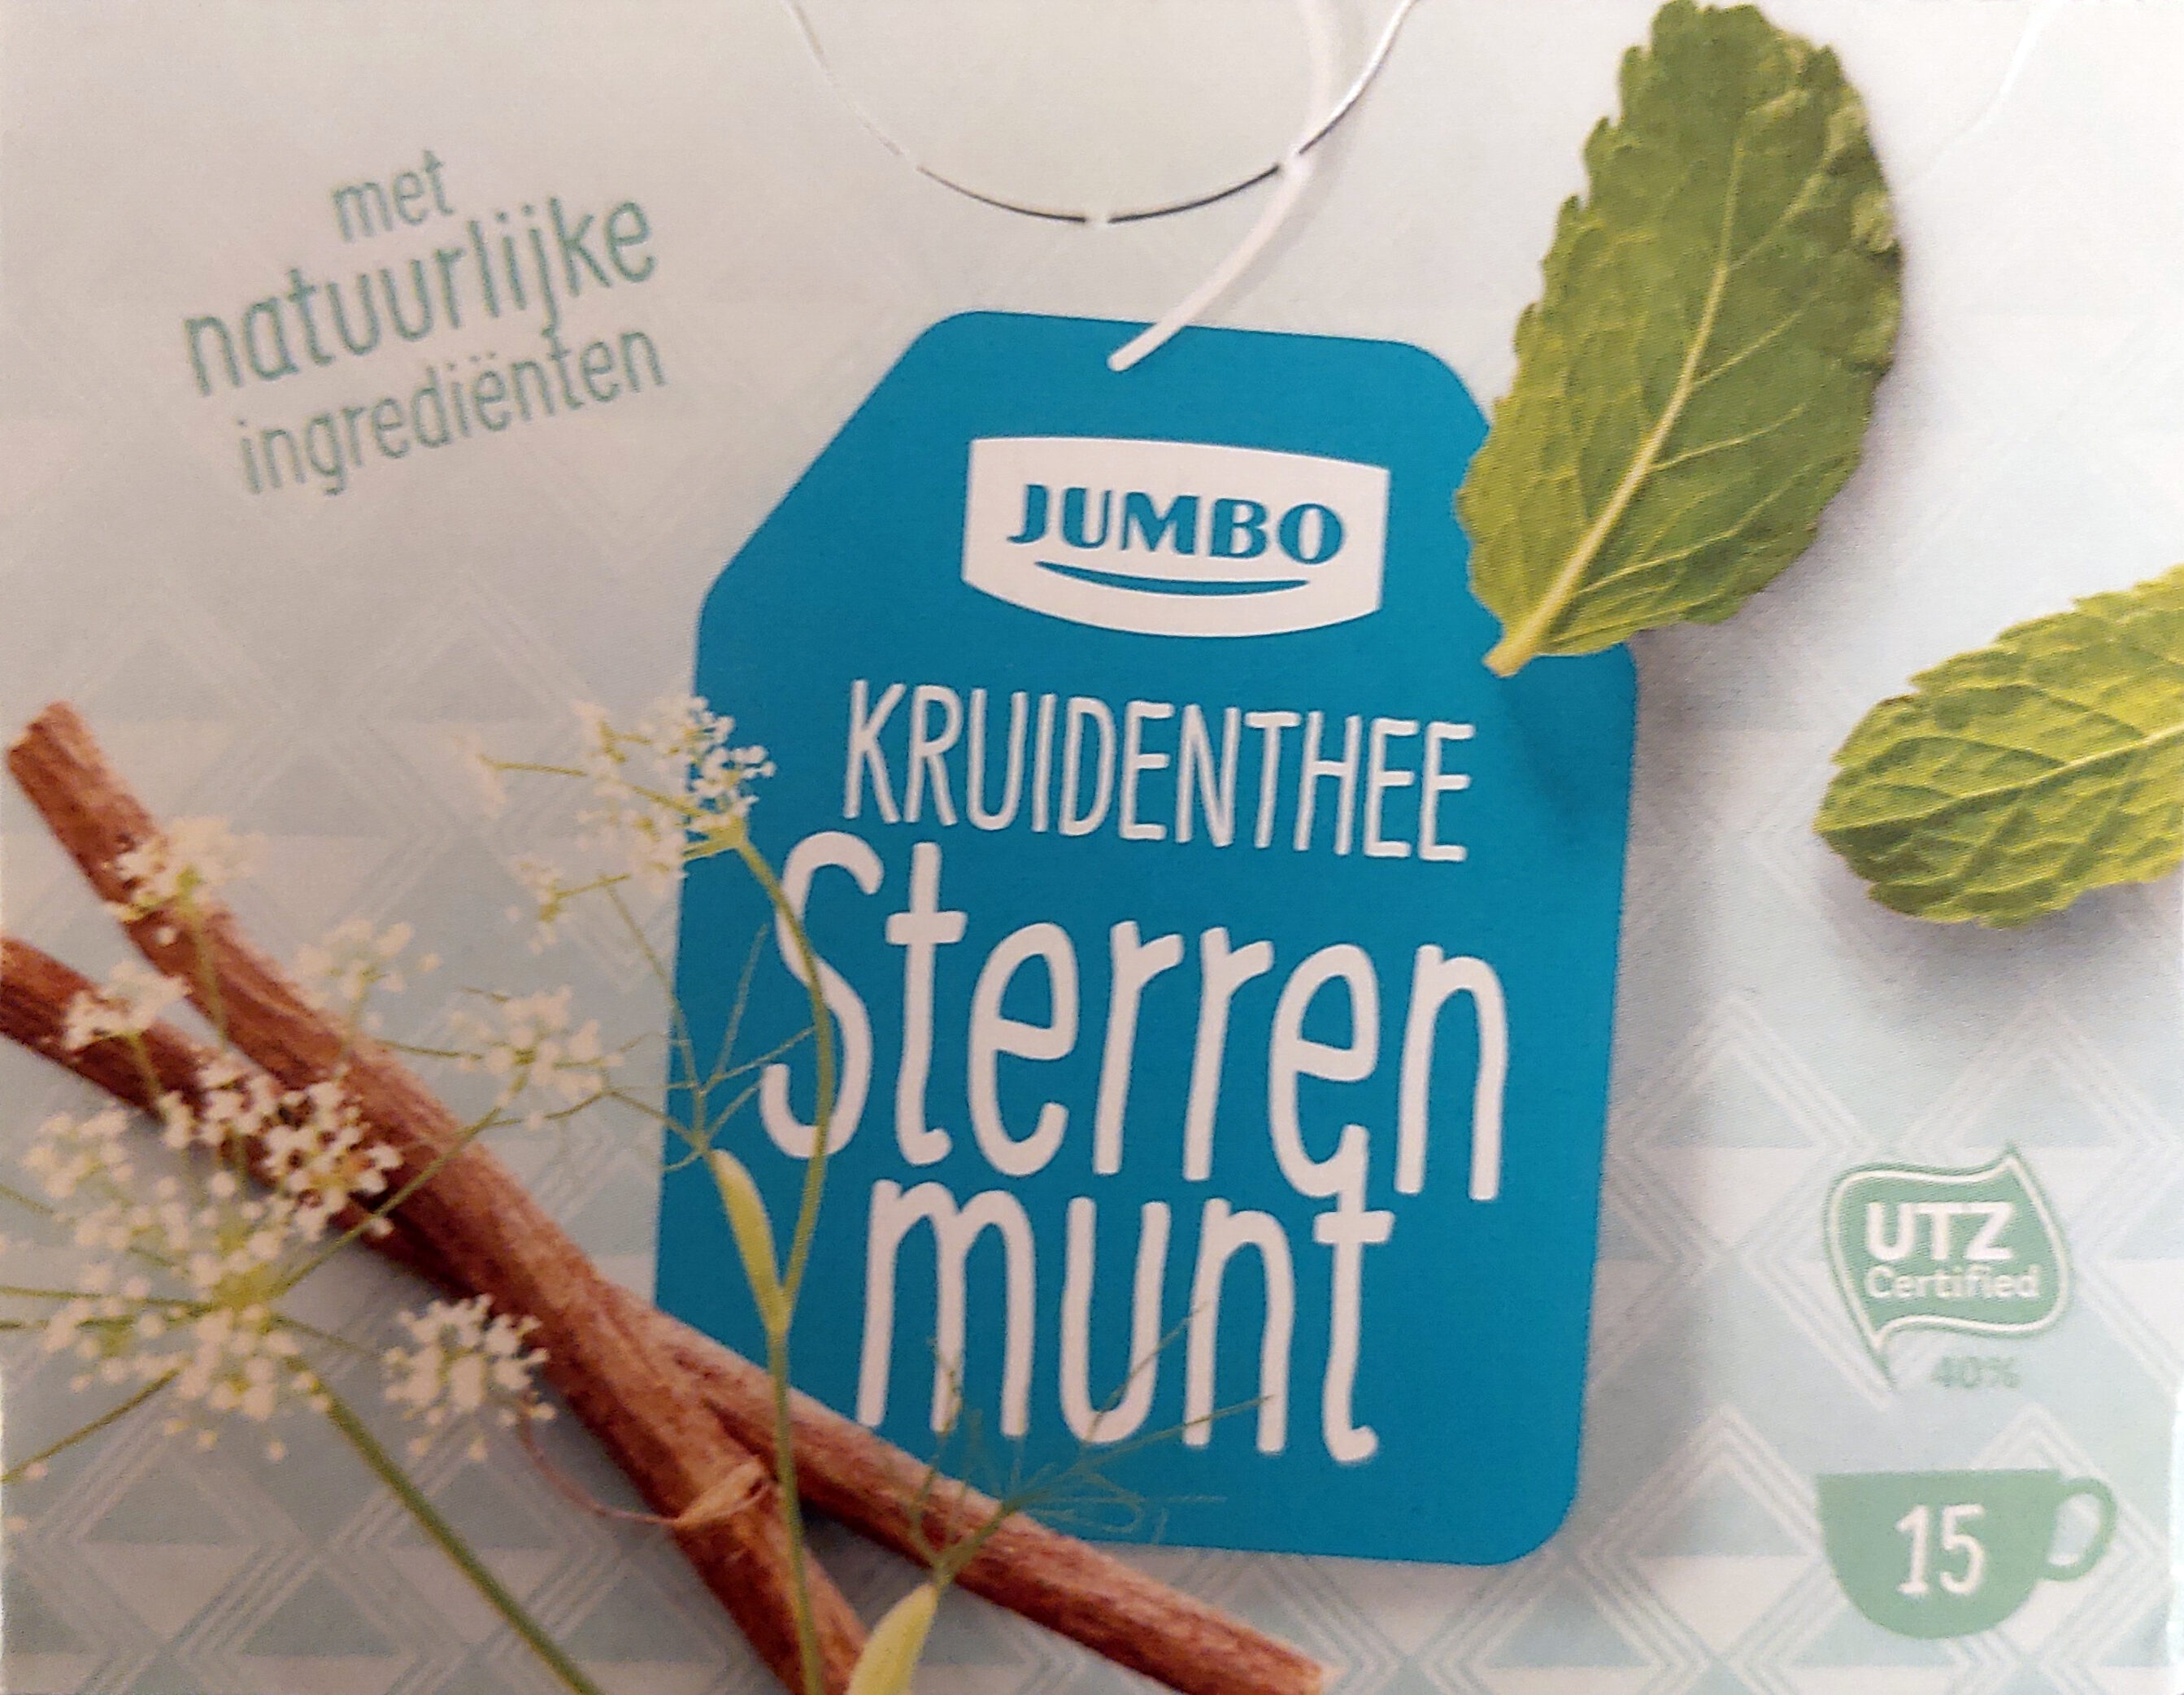 Sterrenmunt kruidenthee - Product